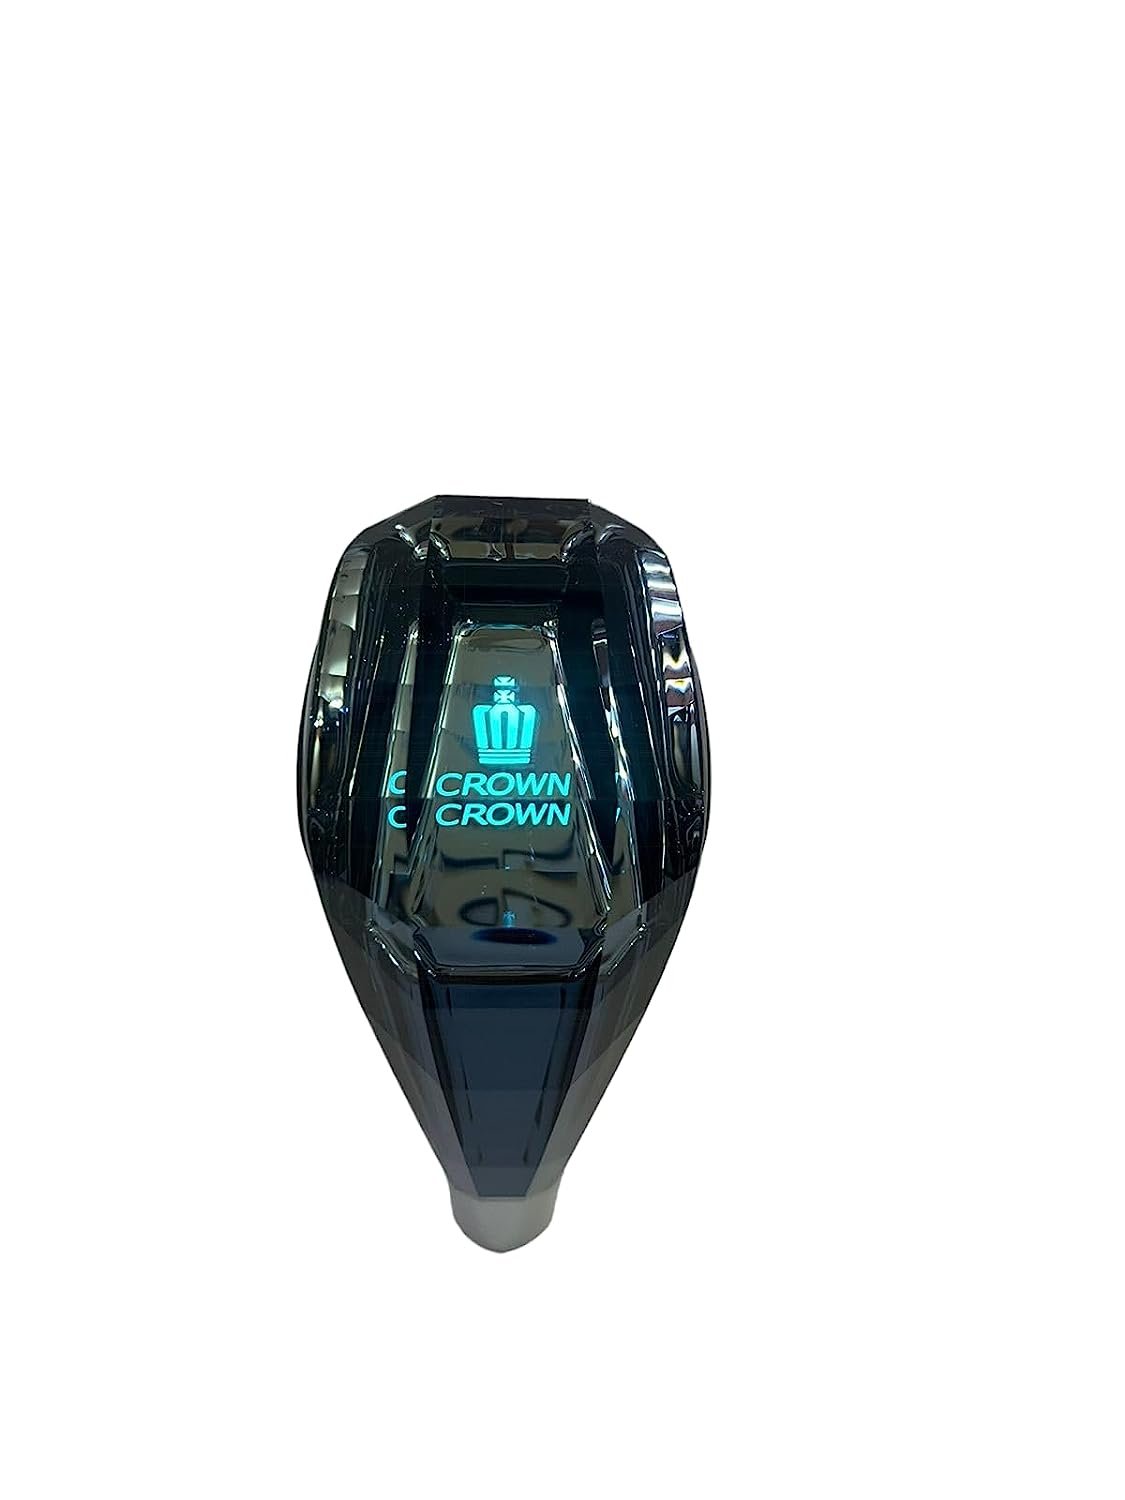 Crystal Shape Car Crown LED Handball Crystal Shift Knob Shift Lever 7 Color Lights Illumination Touch Sensor Line Lighting Compatible with All Automatic Cars Image 